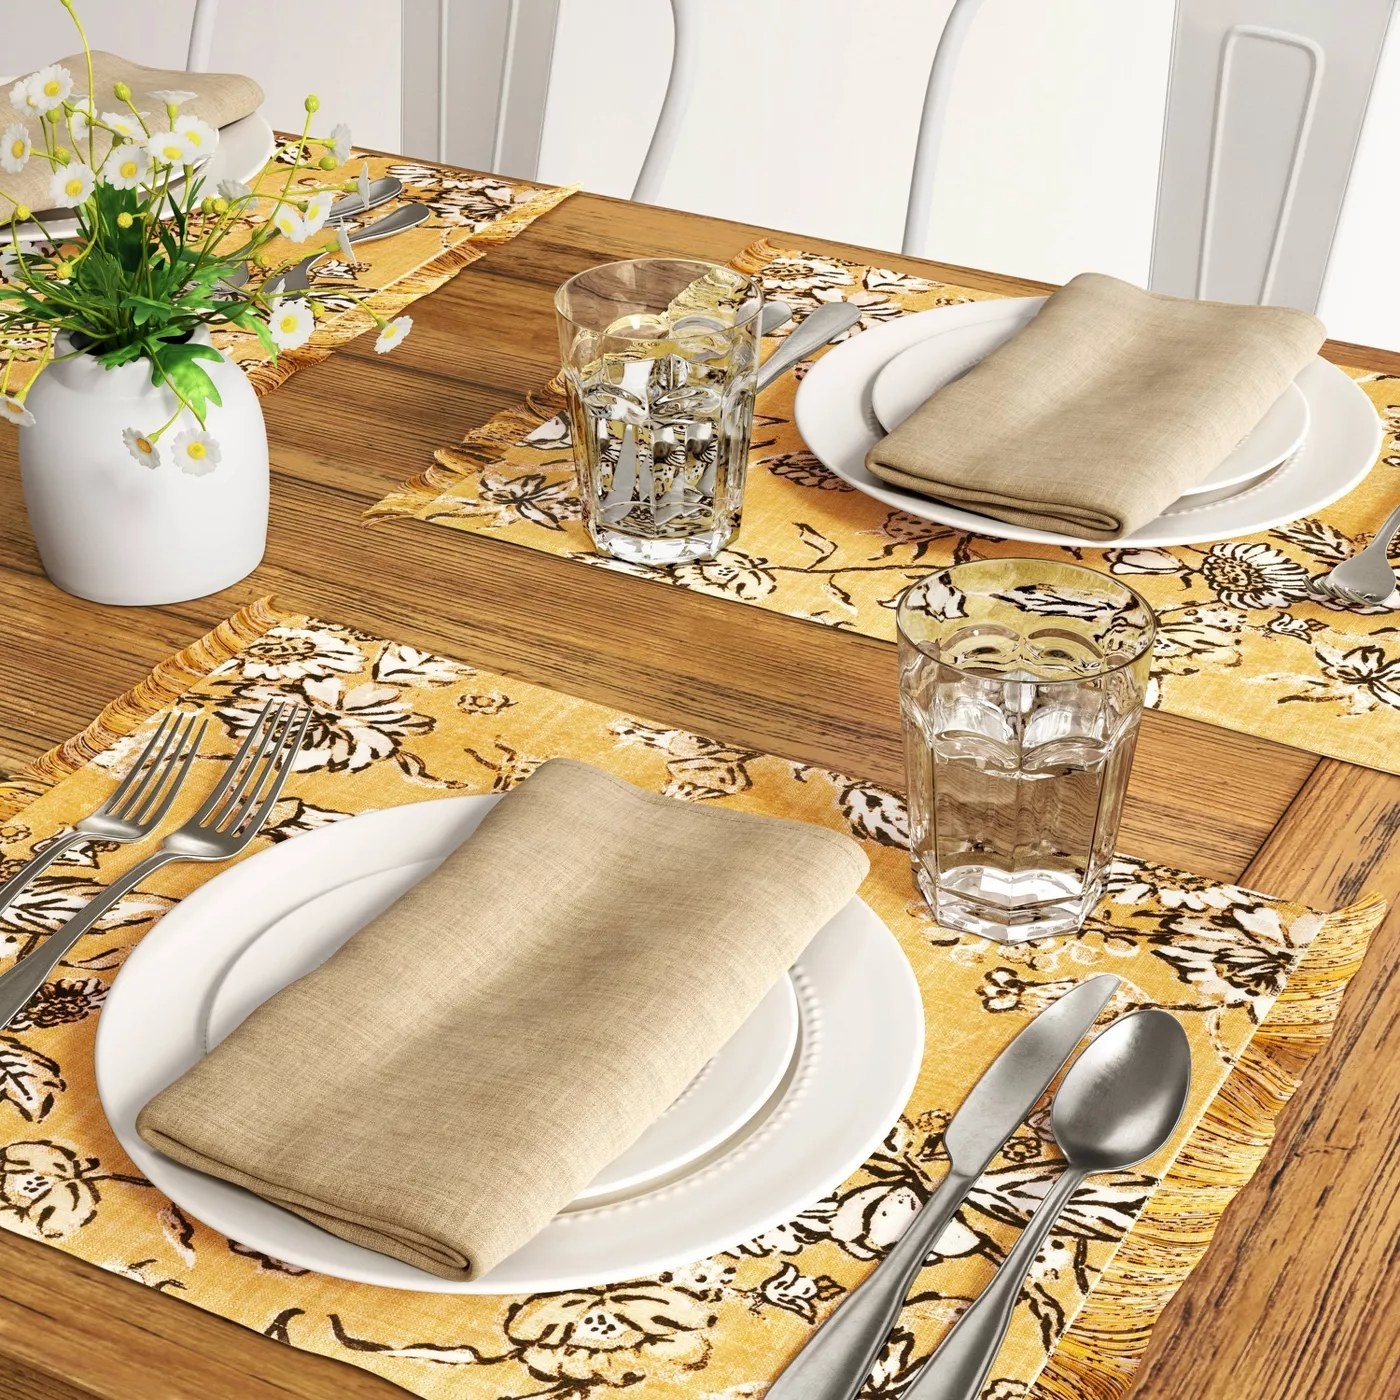 The yellow placemat with a black and white floral print underneath a place setting